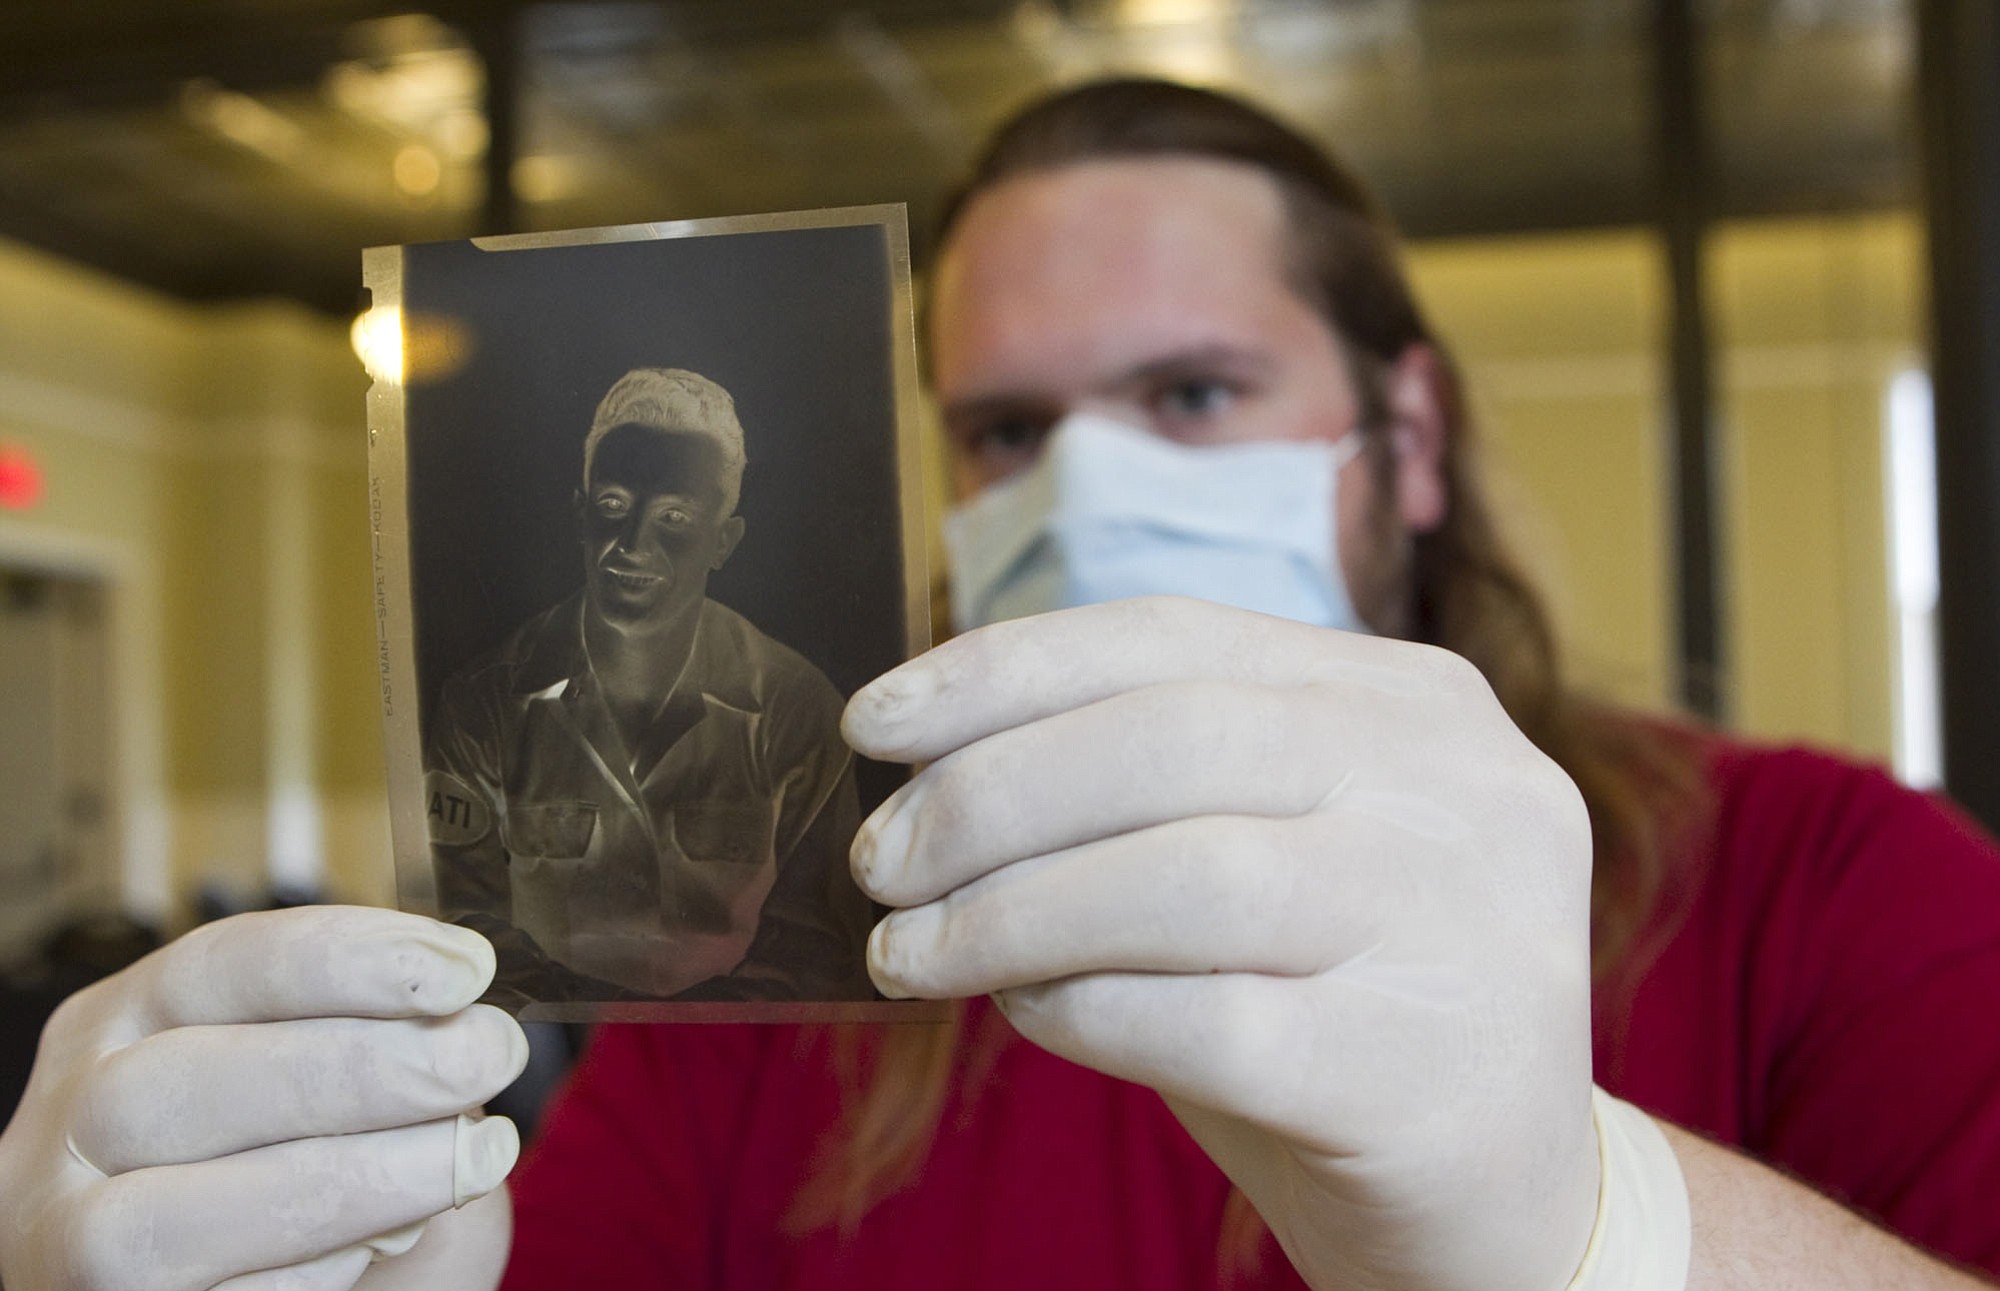 Chris Heagy examines the negative of a photo of Giovanni D. Donato taken in 1943. It is one of thousands of photos taken of soldiers, civilian workers and Italian prisoners, such as Donato, who were at Vancouver Barracks during World War II.